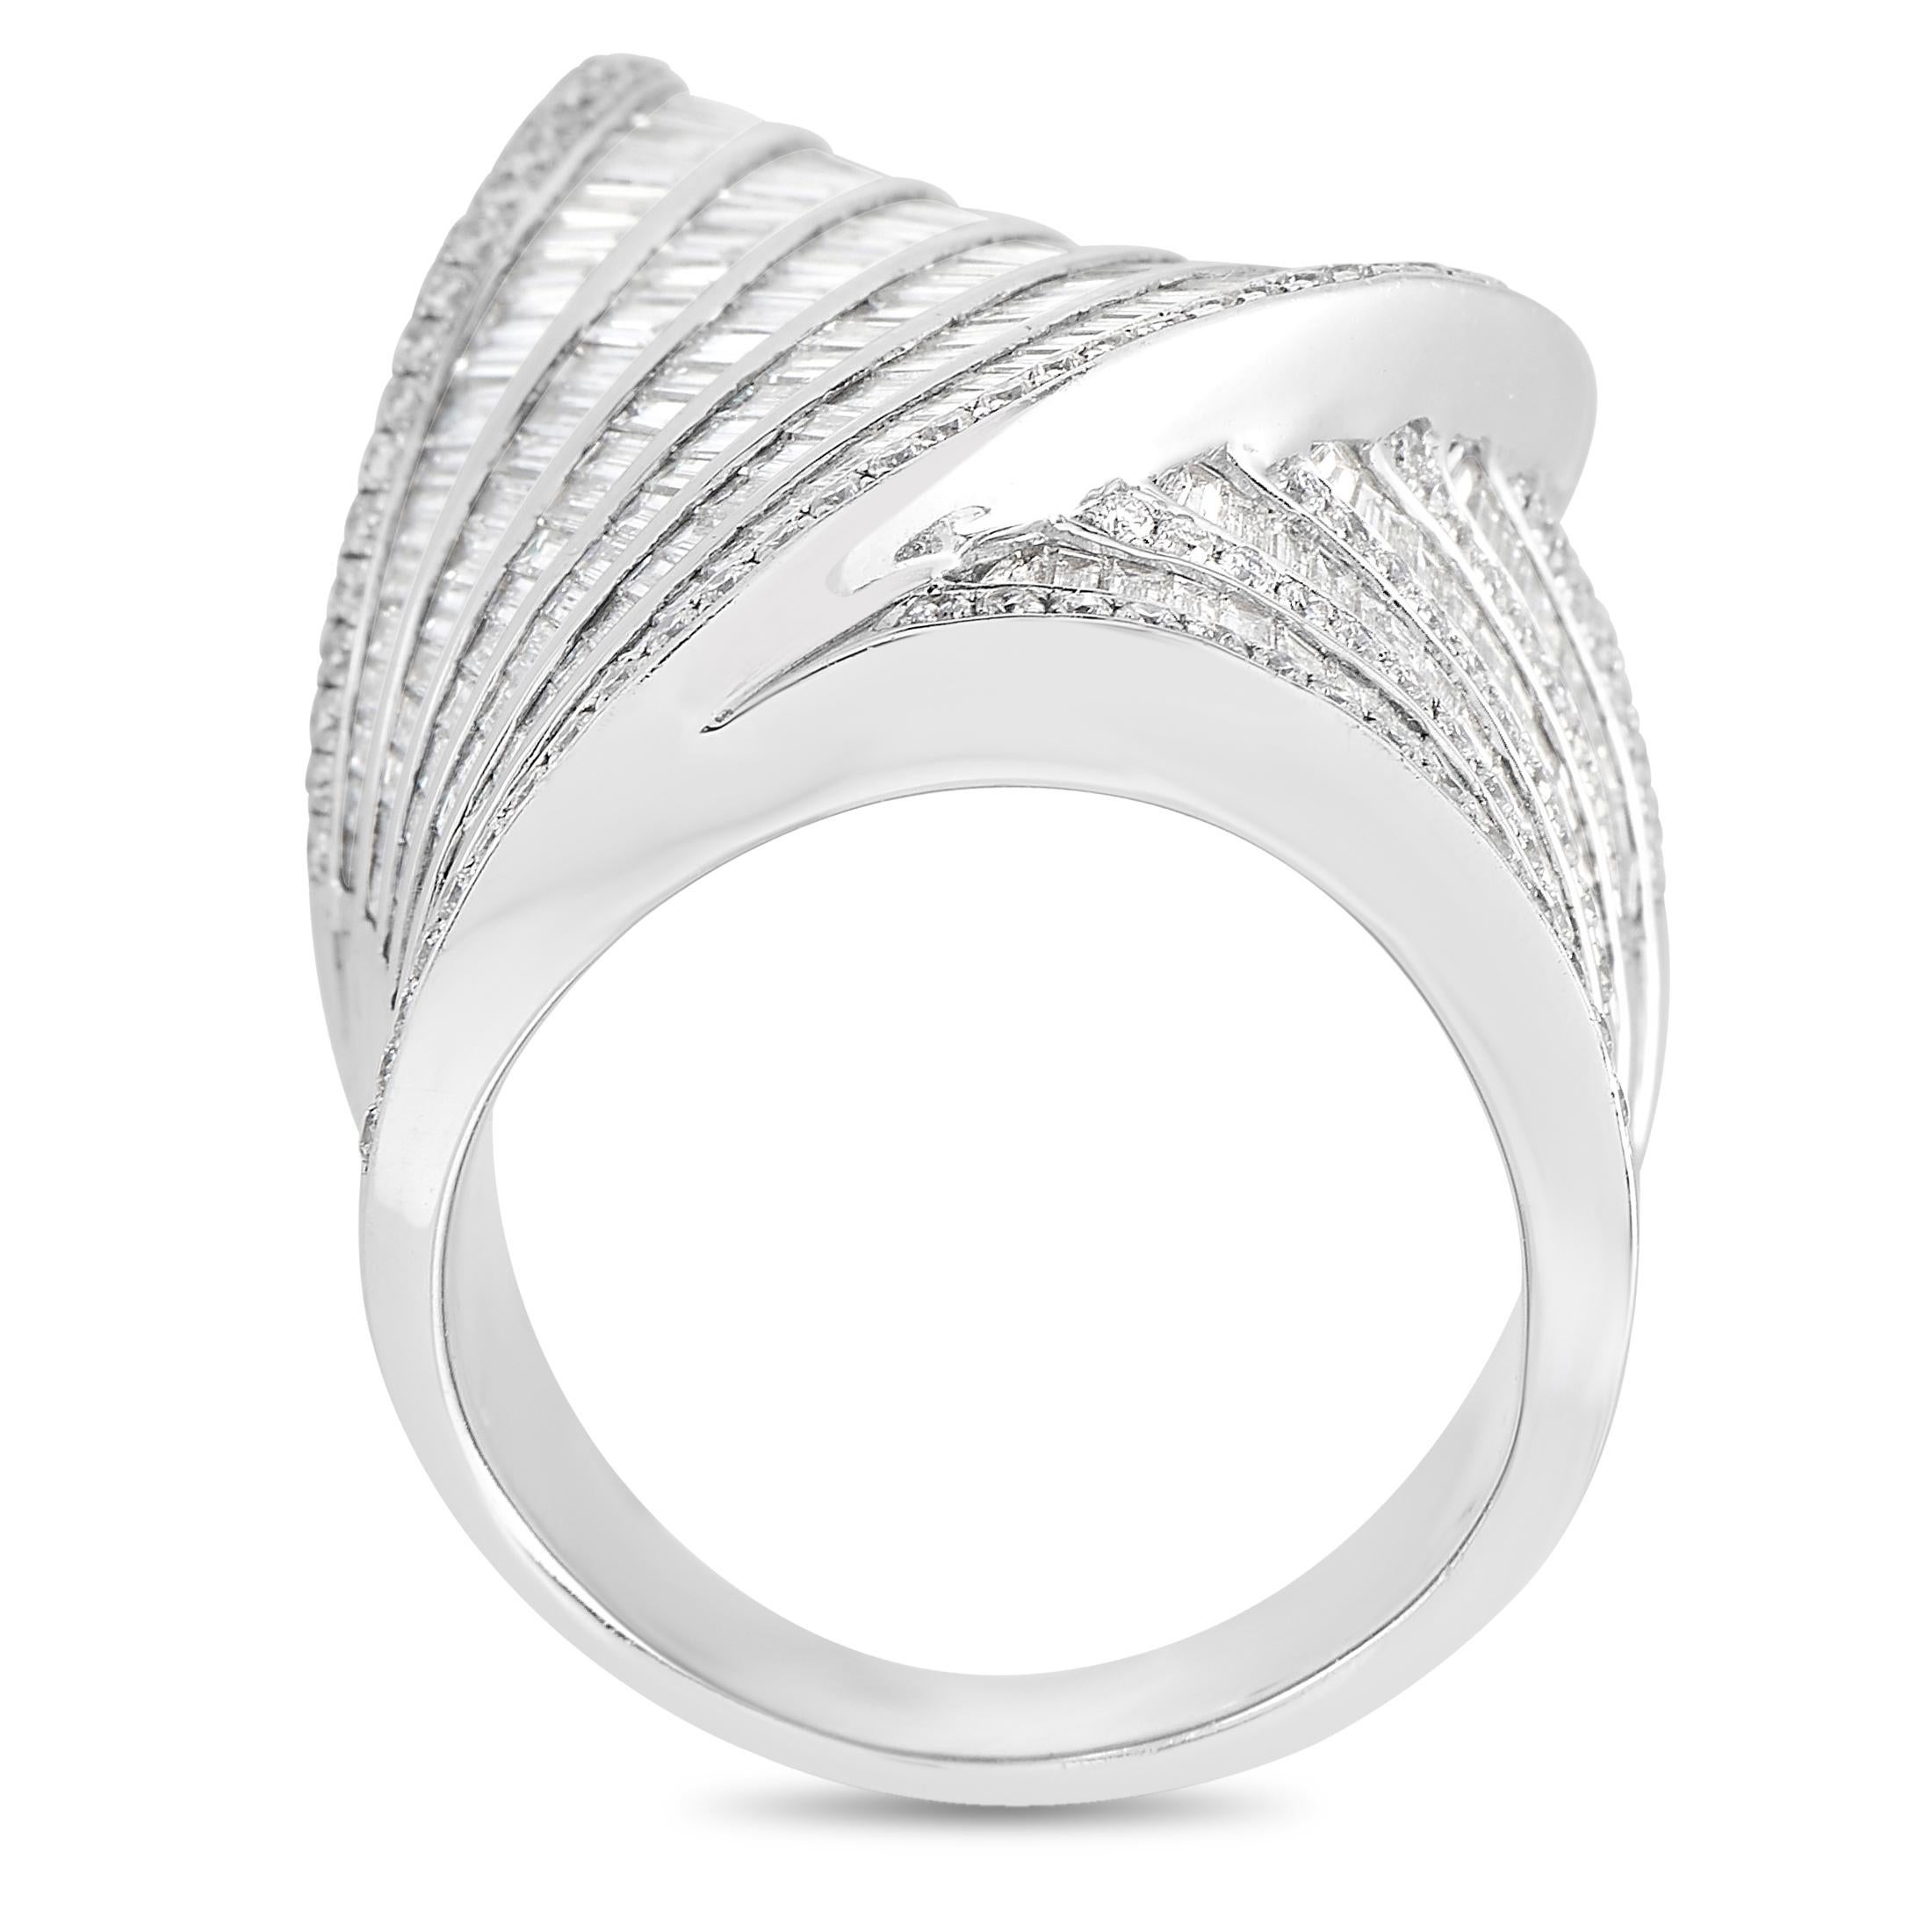 Boasting a chic and modern design, this LB Exclusive ring is crafted with 18K white gold and studded with brilliant diamonds that total 4.7 carats. It features a band thickness of 8 mm and a top height of 6 mm, while its top dimensions measure 27 by